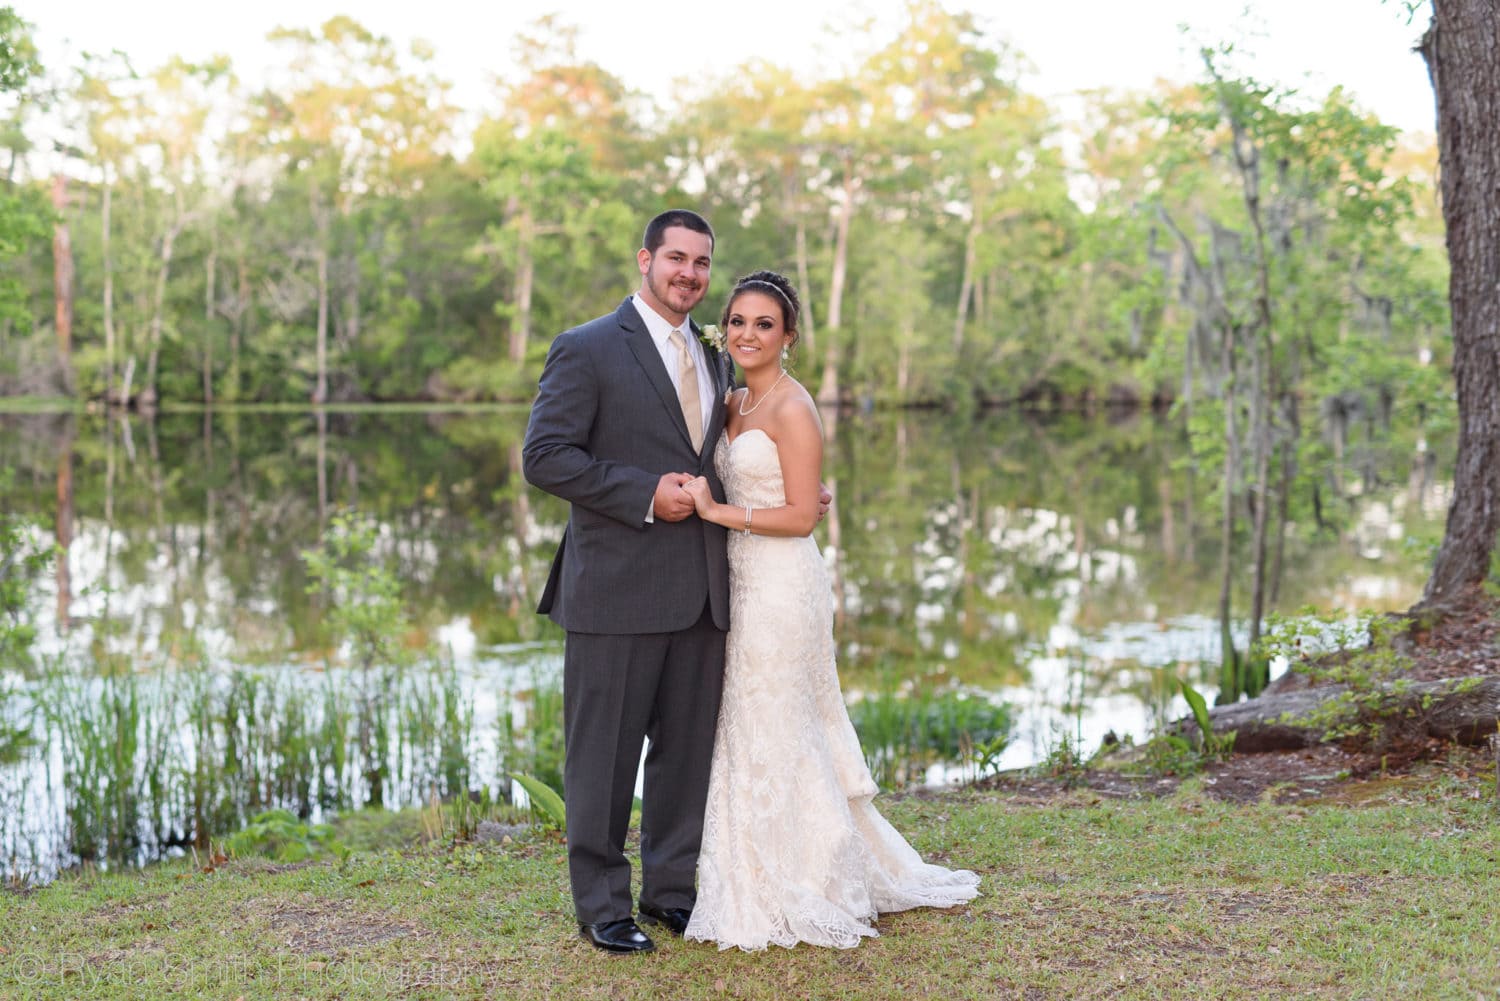 Sunset portraits by the waccamaw river - Upper Mill Plantation